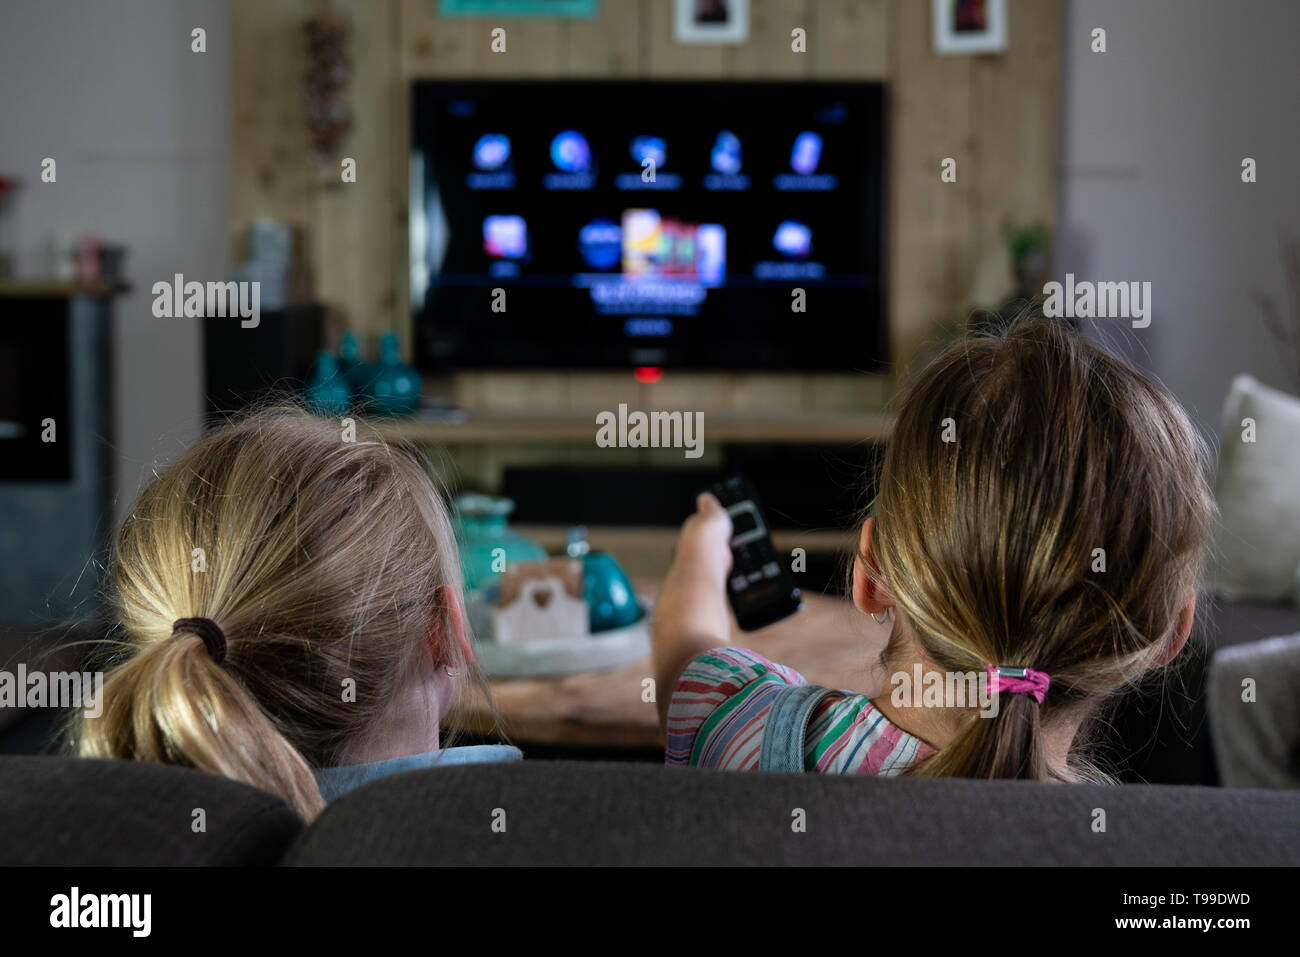 Rear view of two children sliding through the apps on a smart tv. back of the children with the focus on the remote control. Everyday futurism Stock Photo